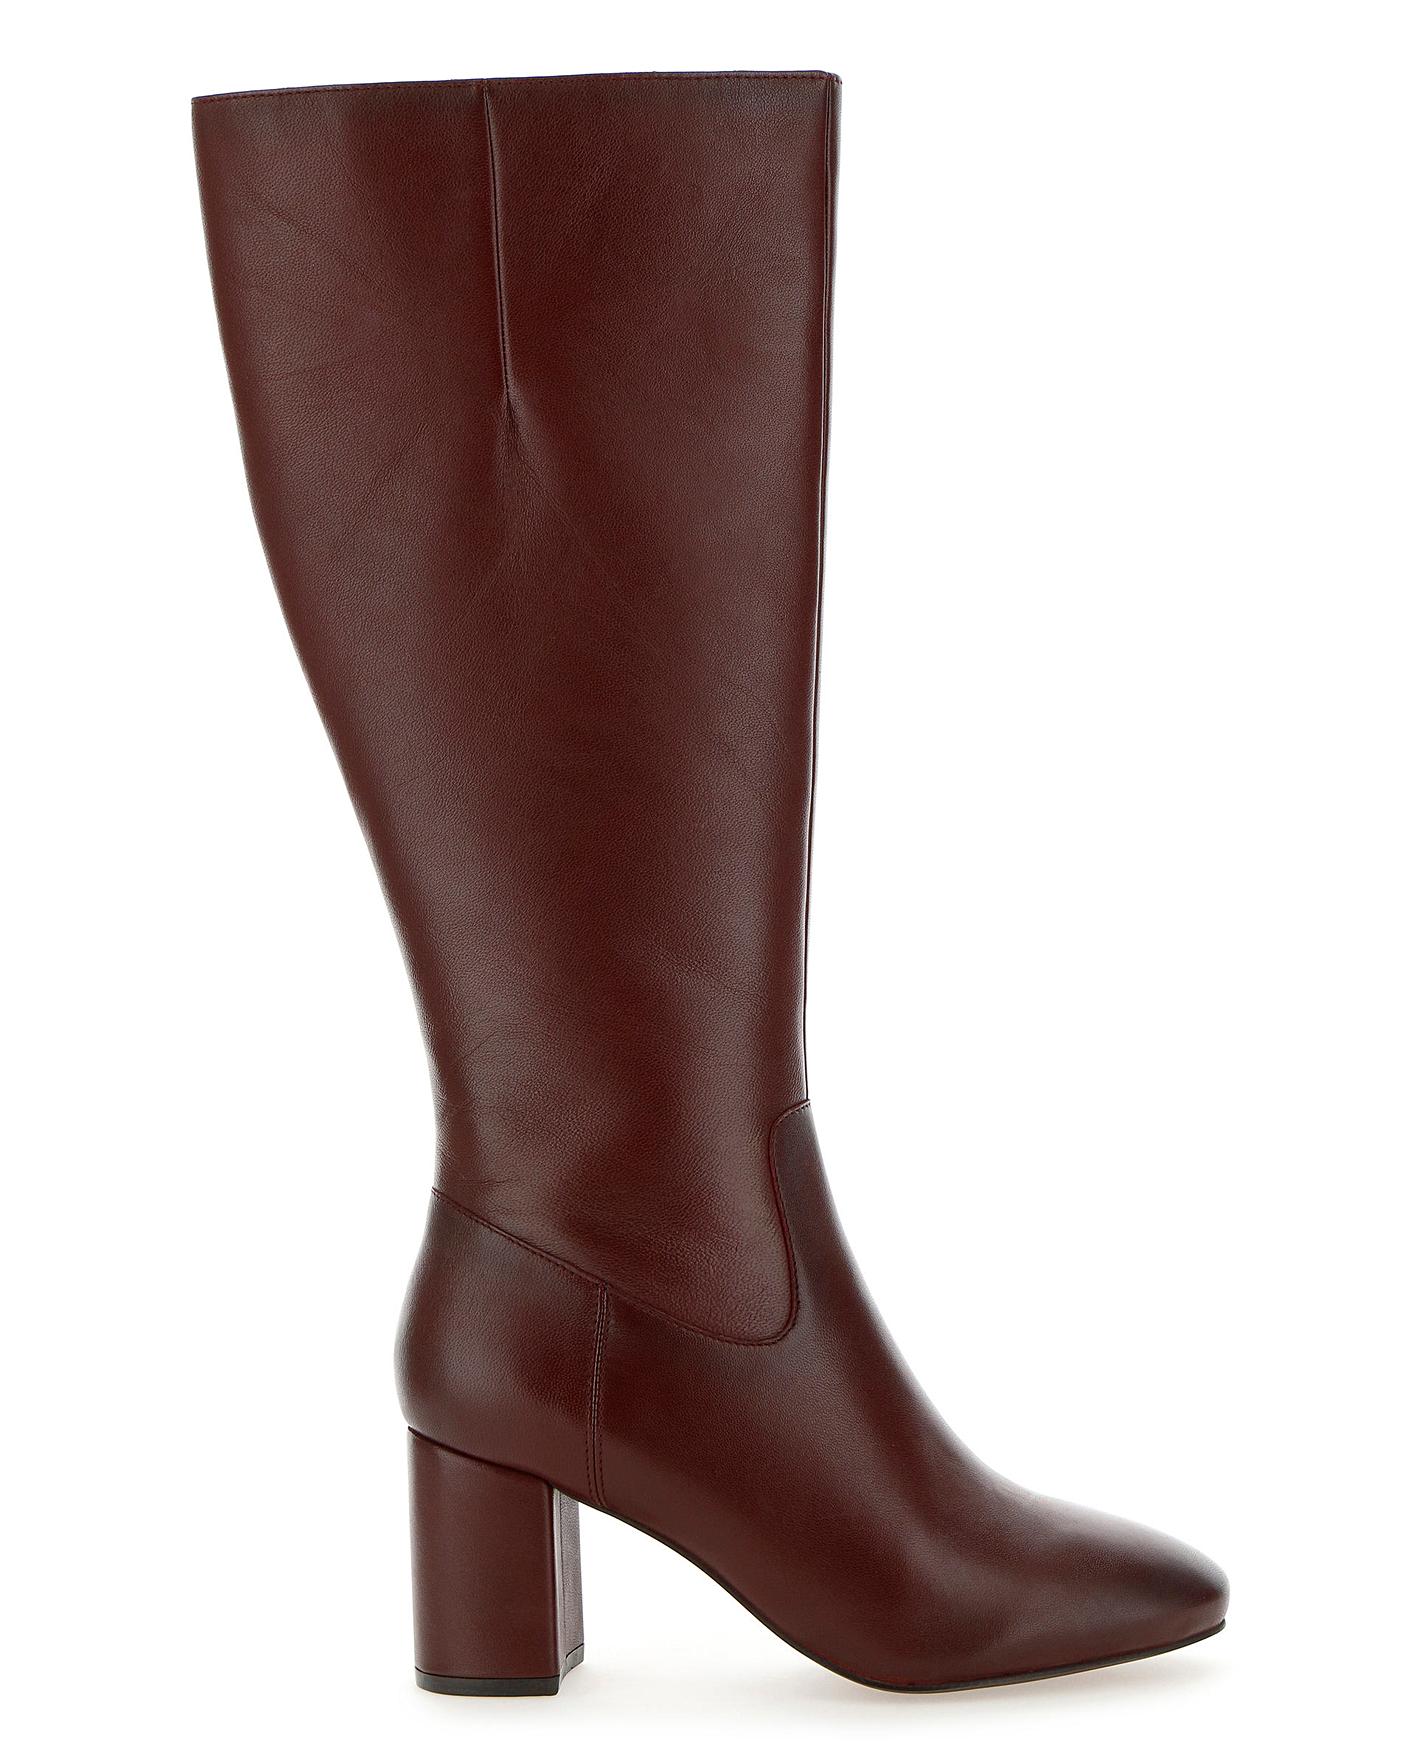 Leather Boots EEE Fit Super Curvy Calf 